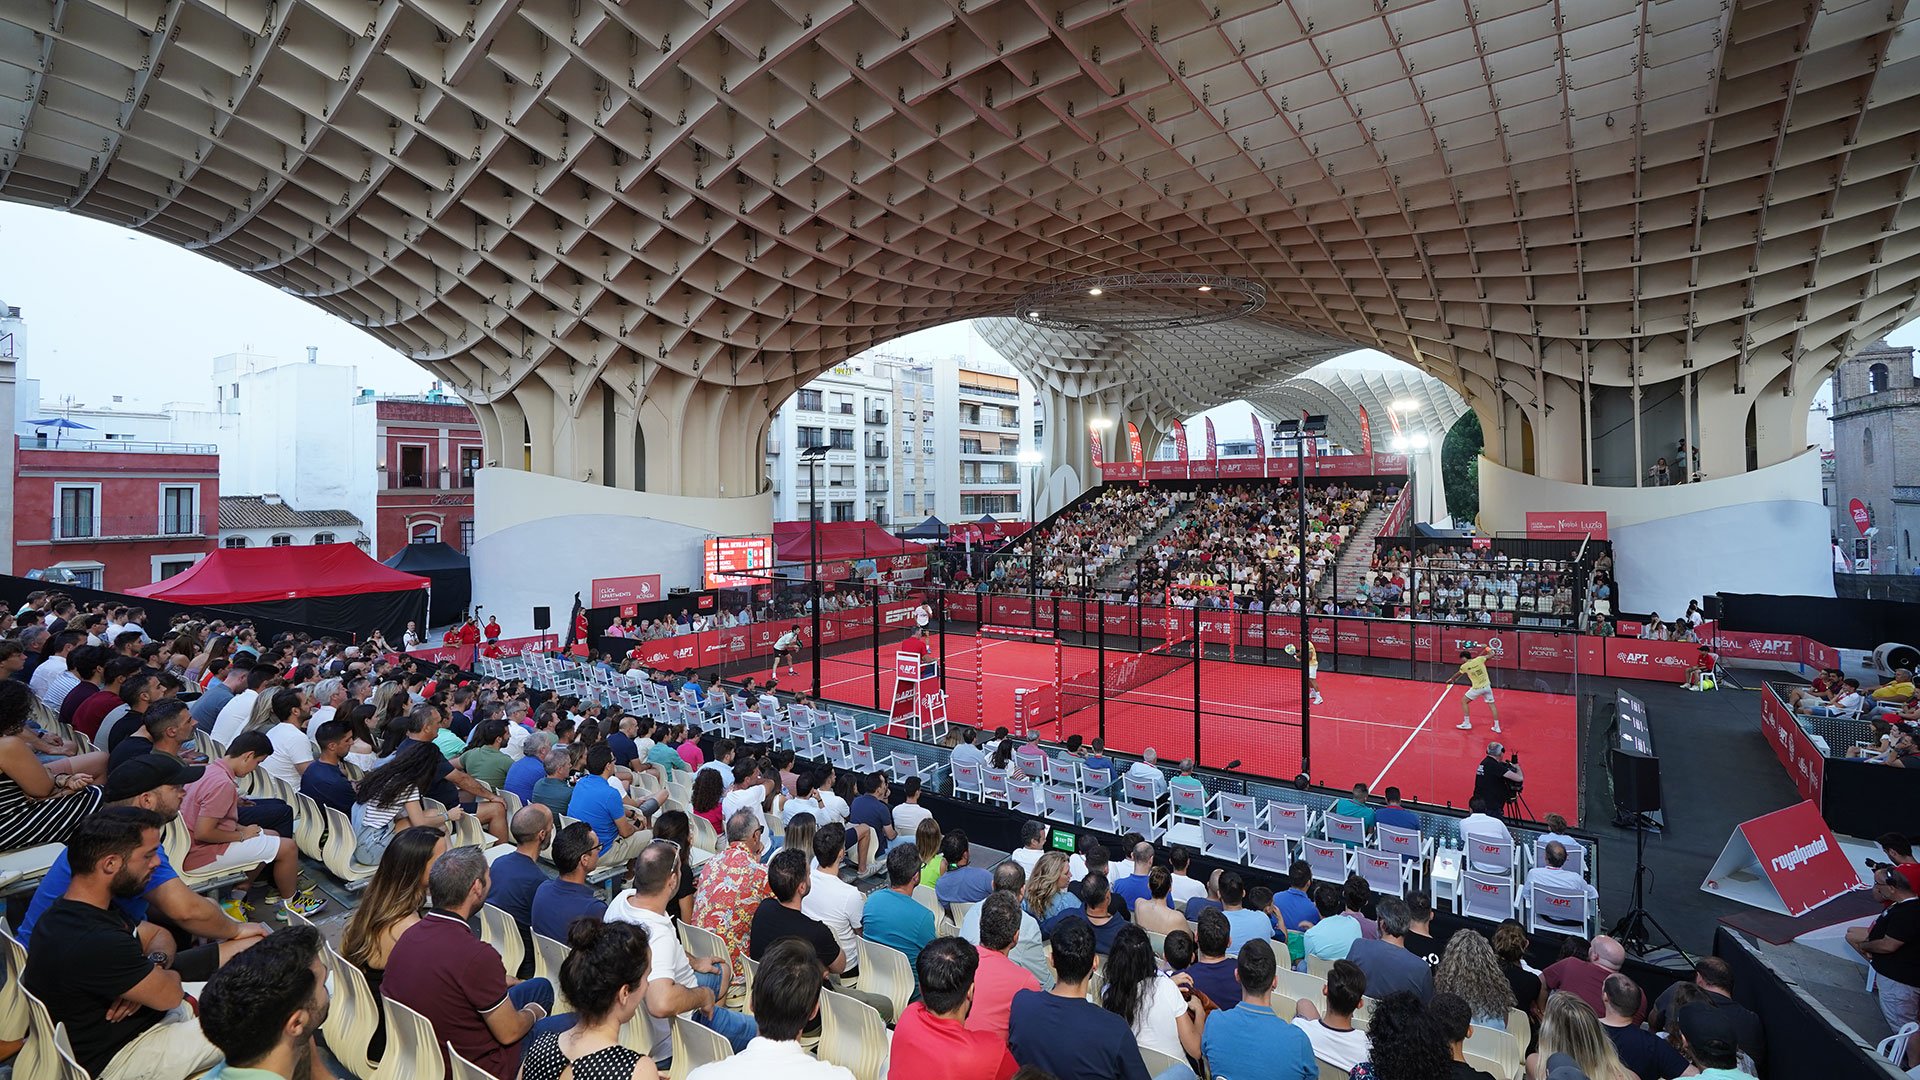 Poll: the padel would be a threat to tennis